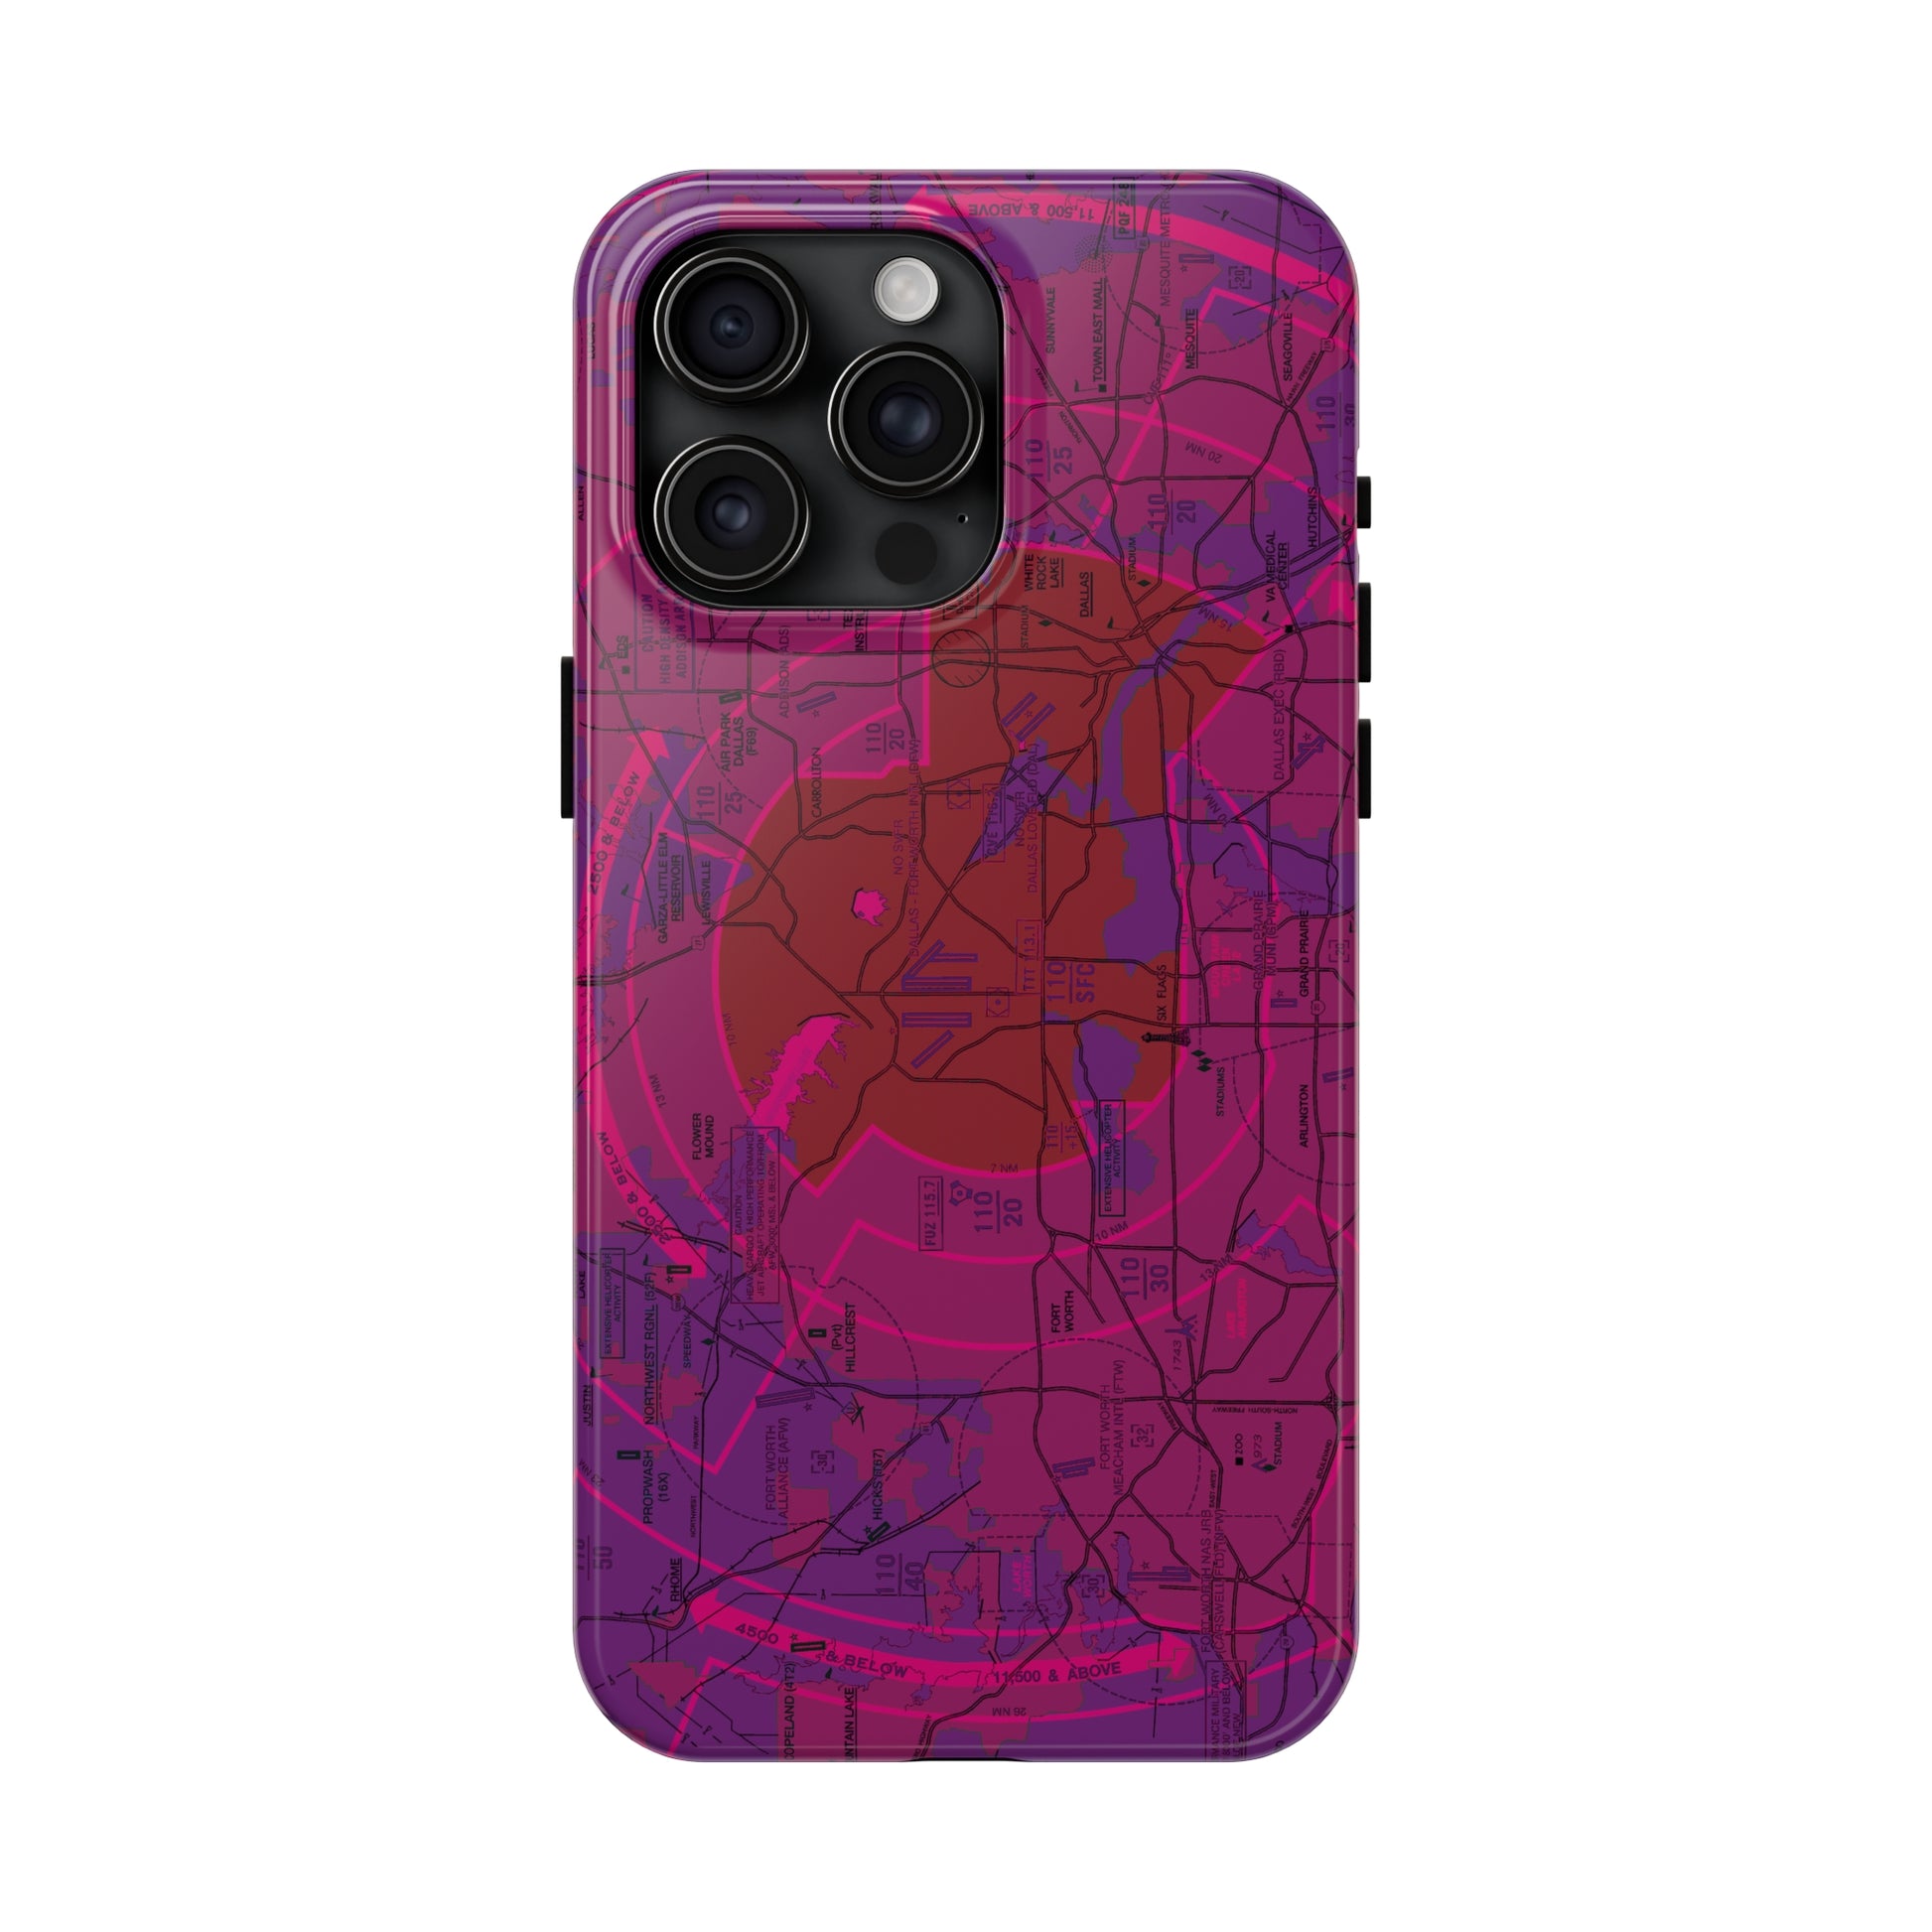 Dallas - Ft. Worth Flyway Chart tough phone cases (purple)